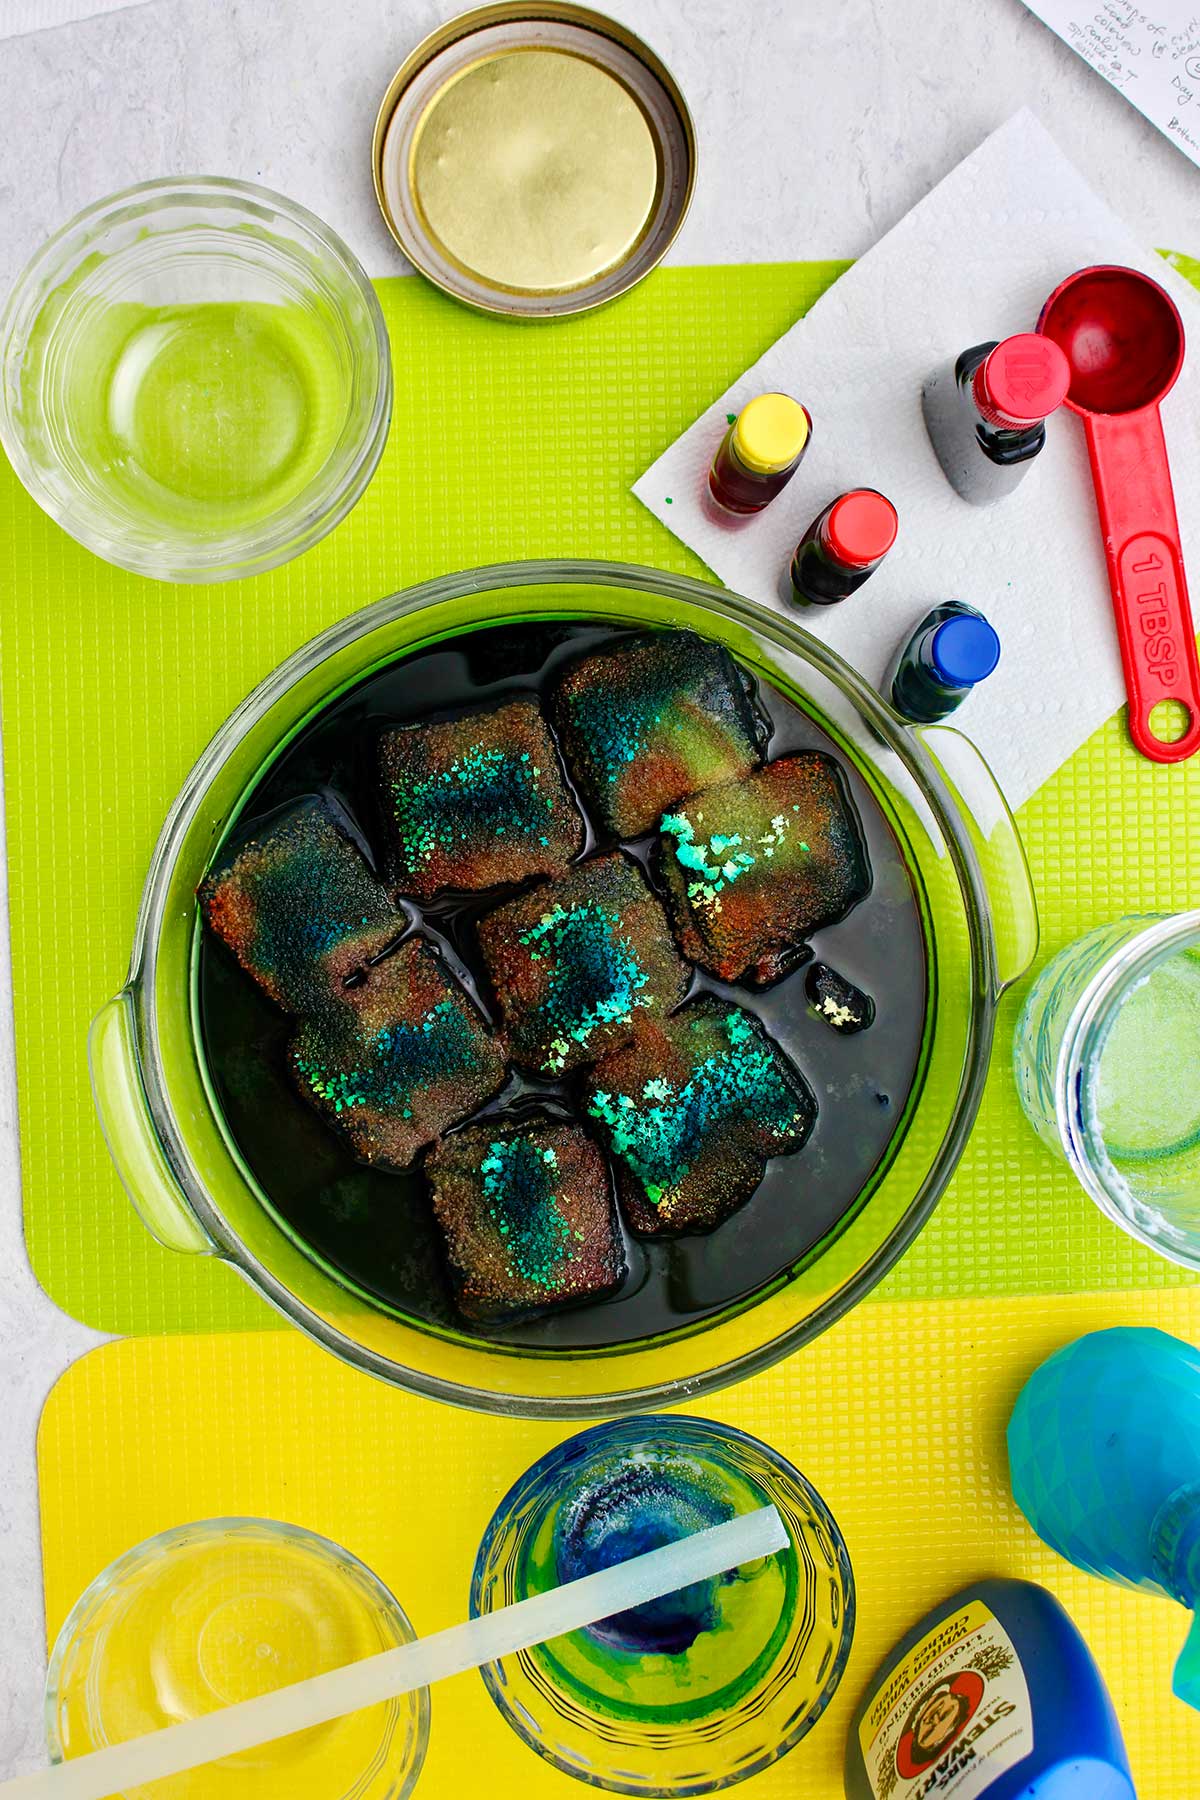 Beginning process of teal and blue growing crystals on charcoal blocks in glass tray sitting on green plastic cutting board with supplies near by.